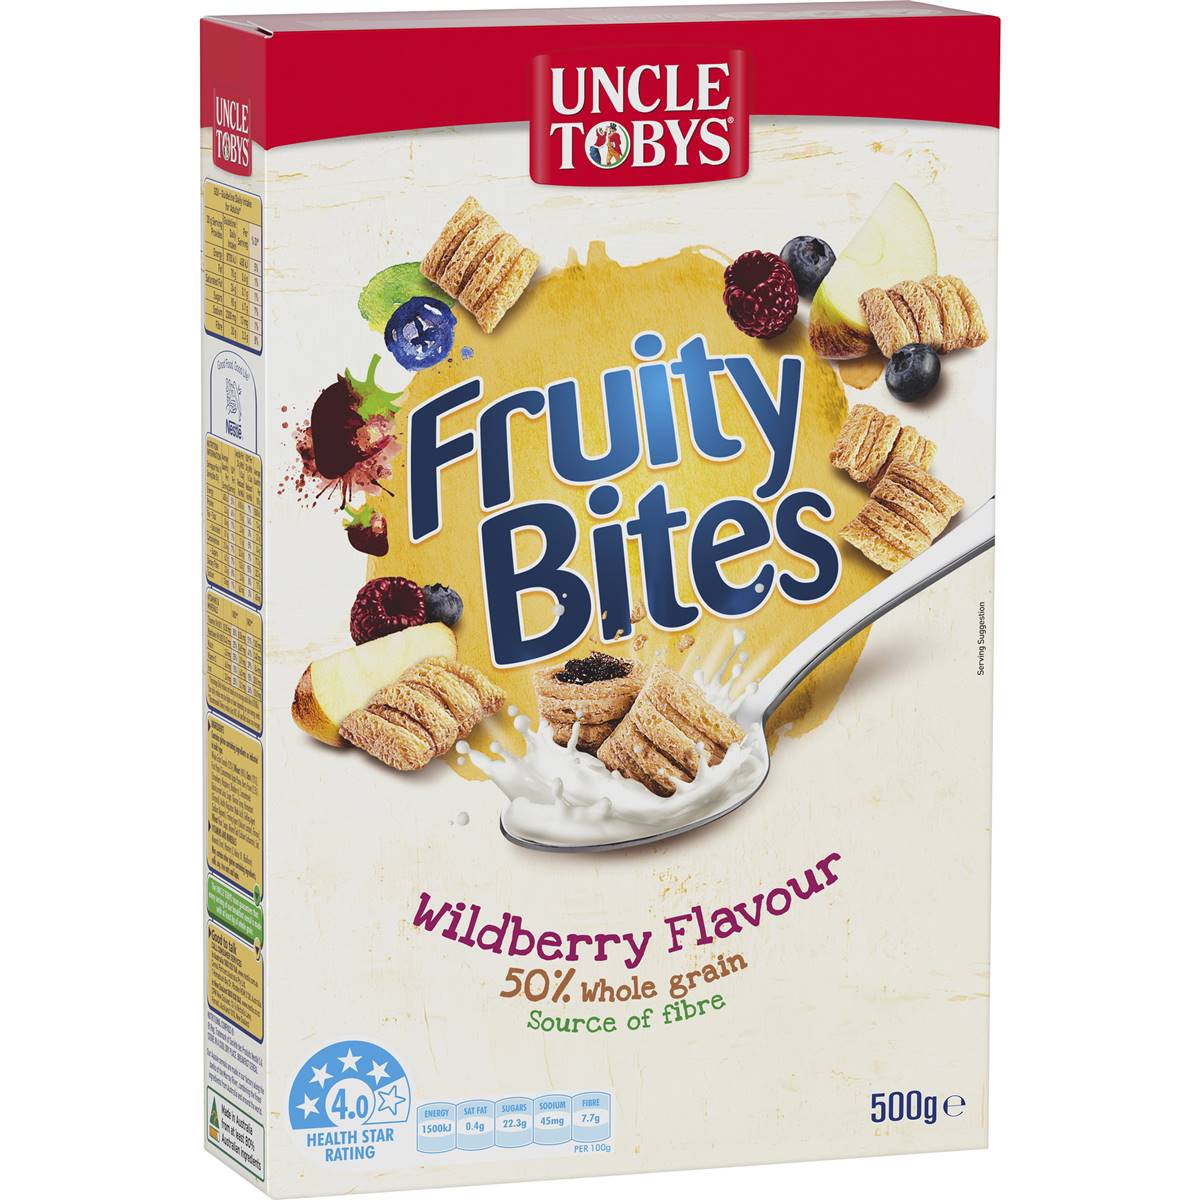 Calories in Uncle Tobys Fruity Bites Wildberry Flavour Breakfast Cereal